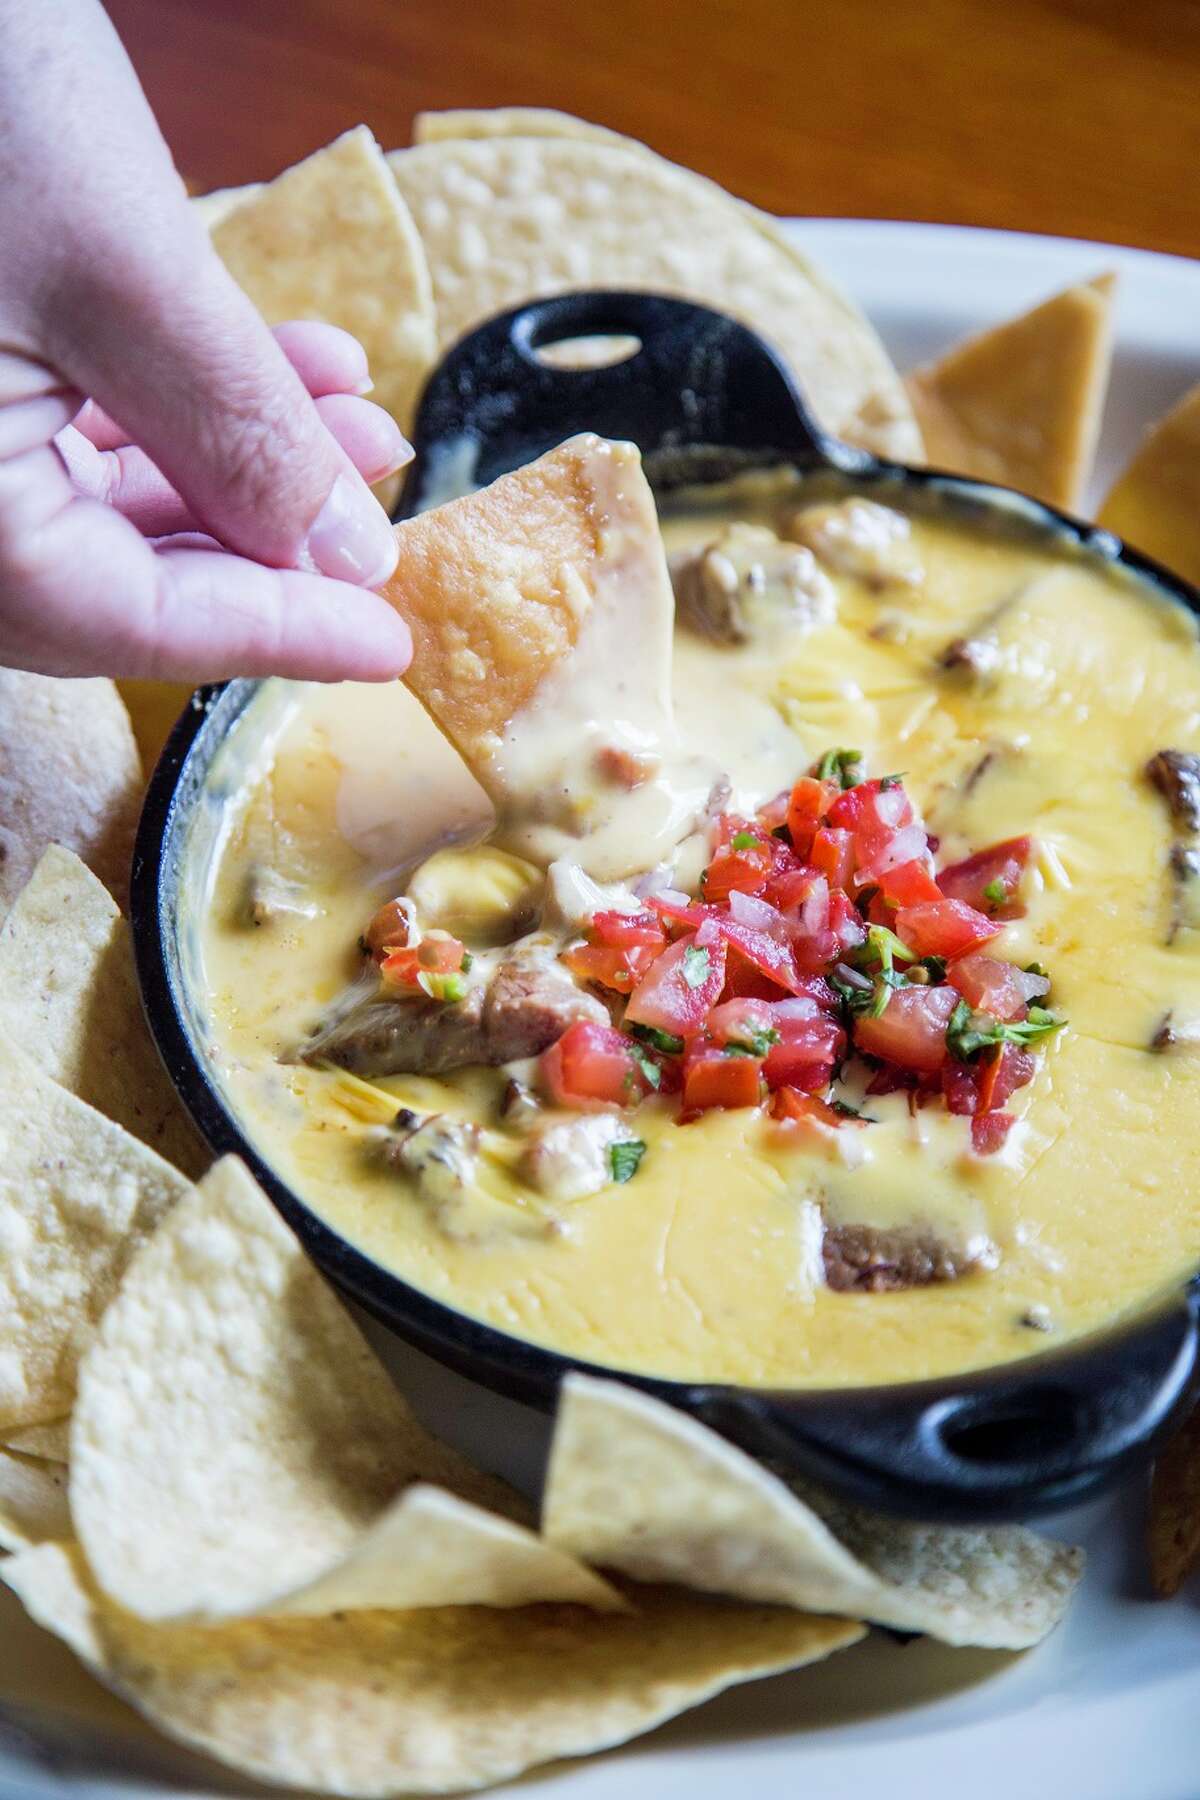 Beaver's on Westheimer offers queso with smoked brisket.